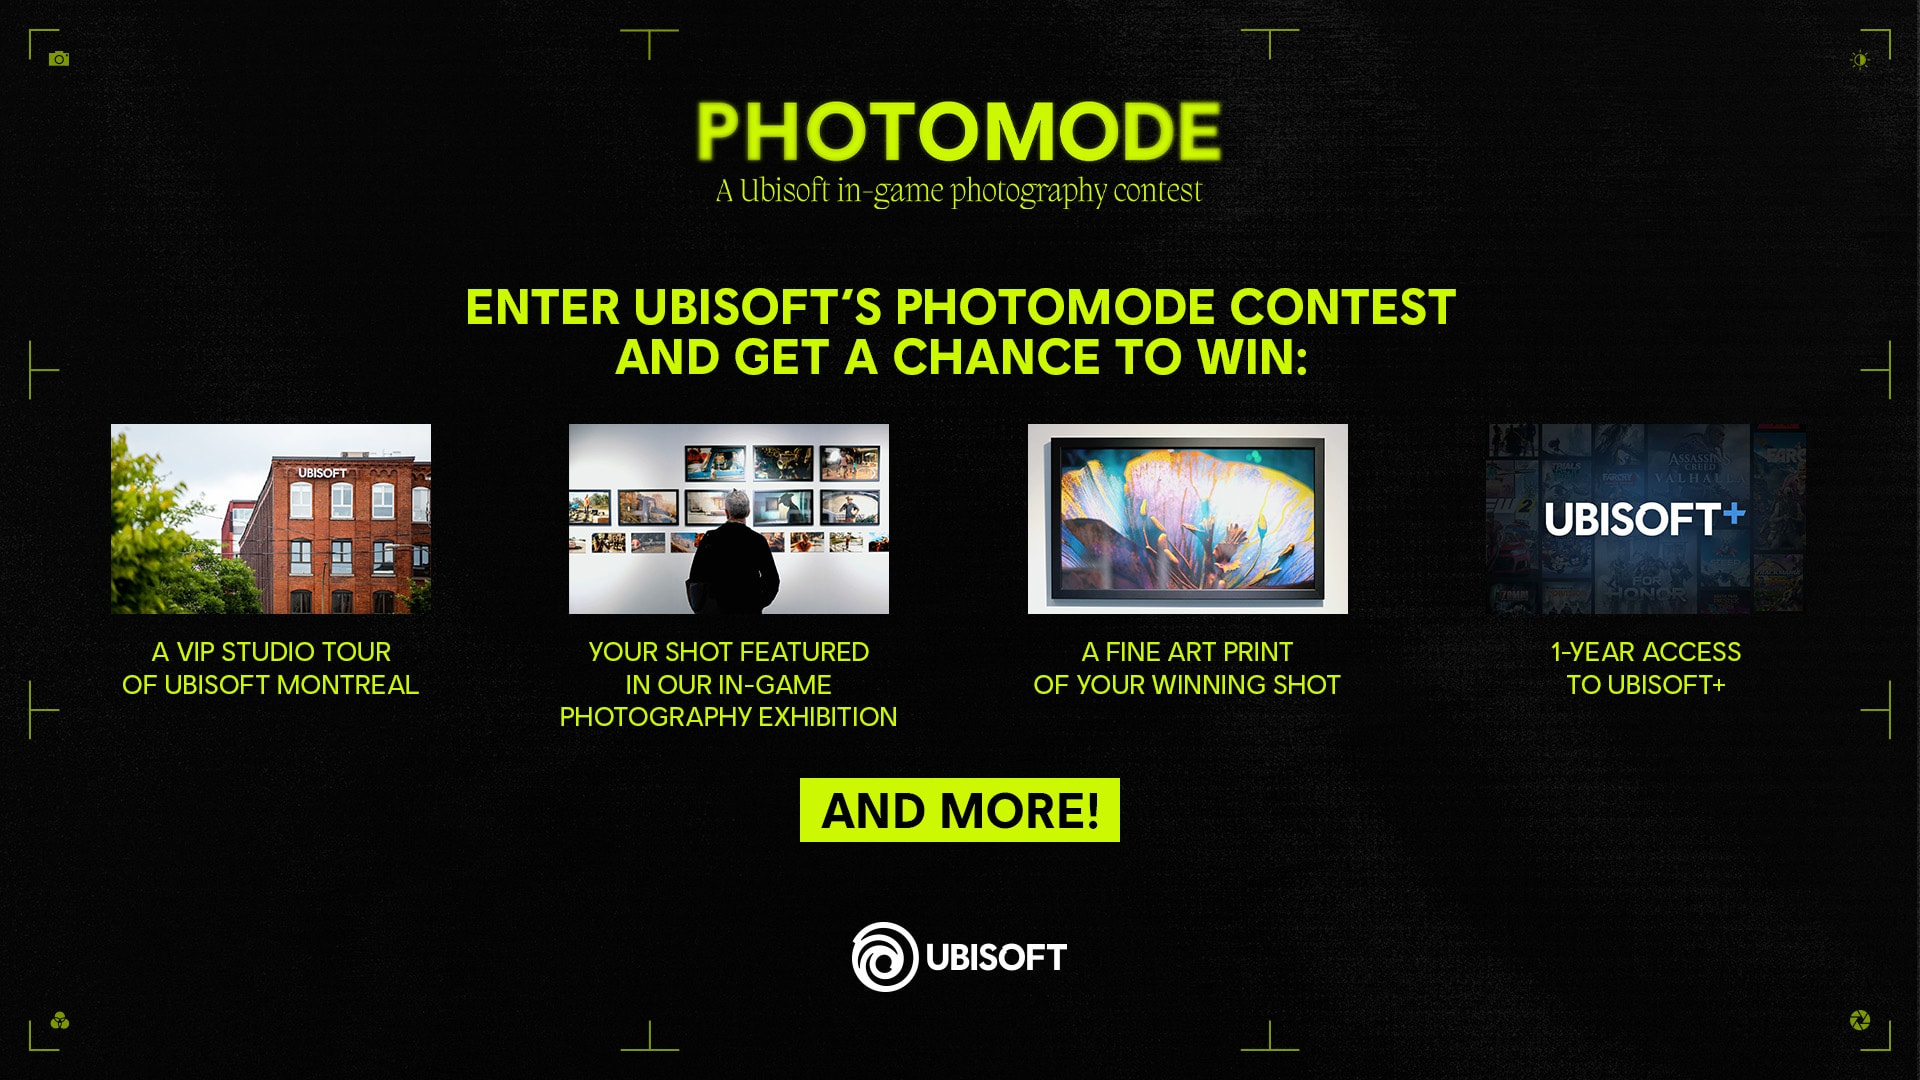 Enter Ubisoft's Photomode Contest and get a chance to win:
- A VIP Studio Tour of Ubisoft Montréal
- Your shot featured in our in-game photography exhibition
- A fine art print of your winning shot
- A-year access to Ubisoft+

And more!